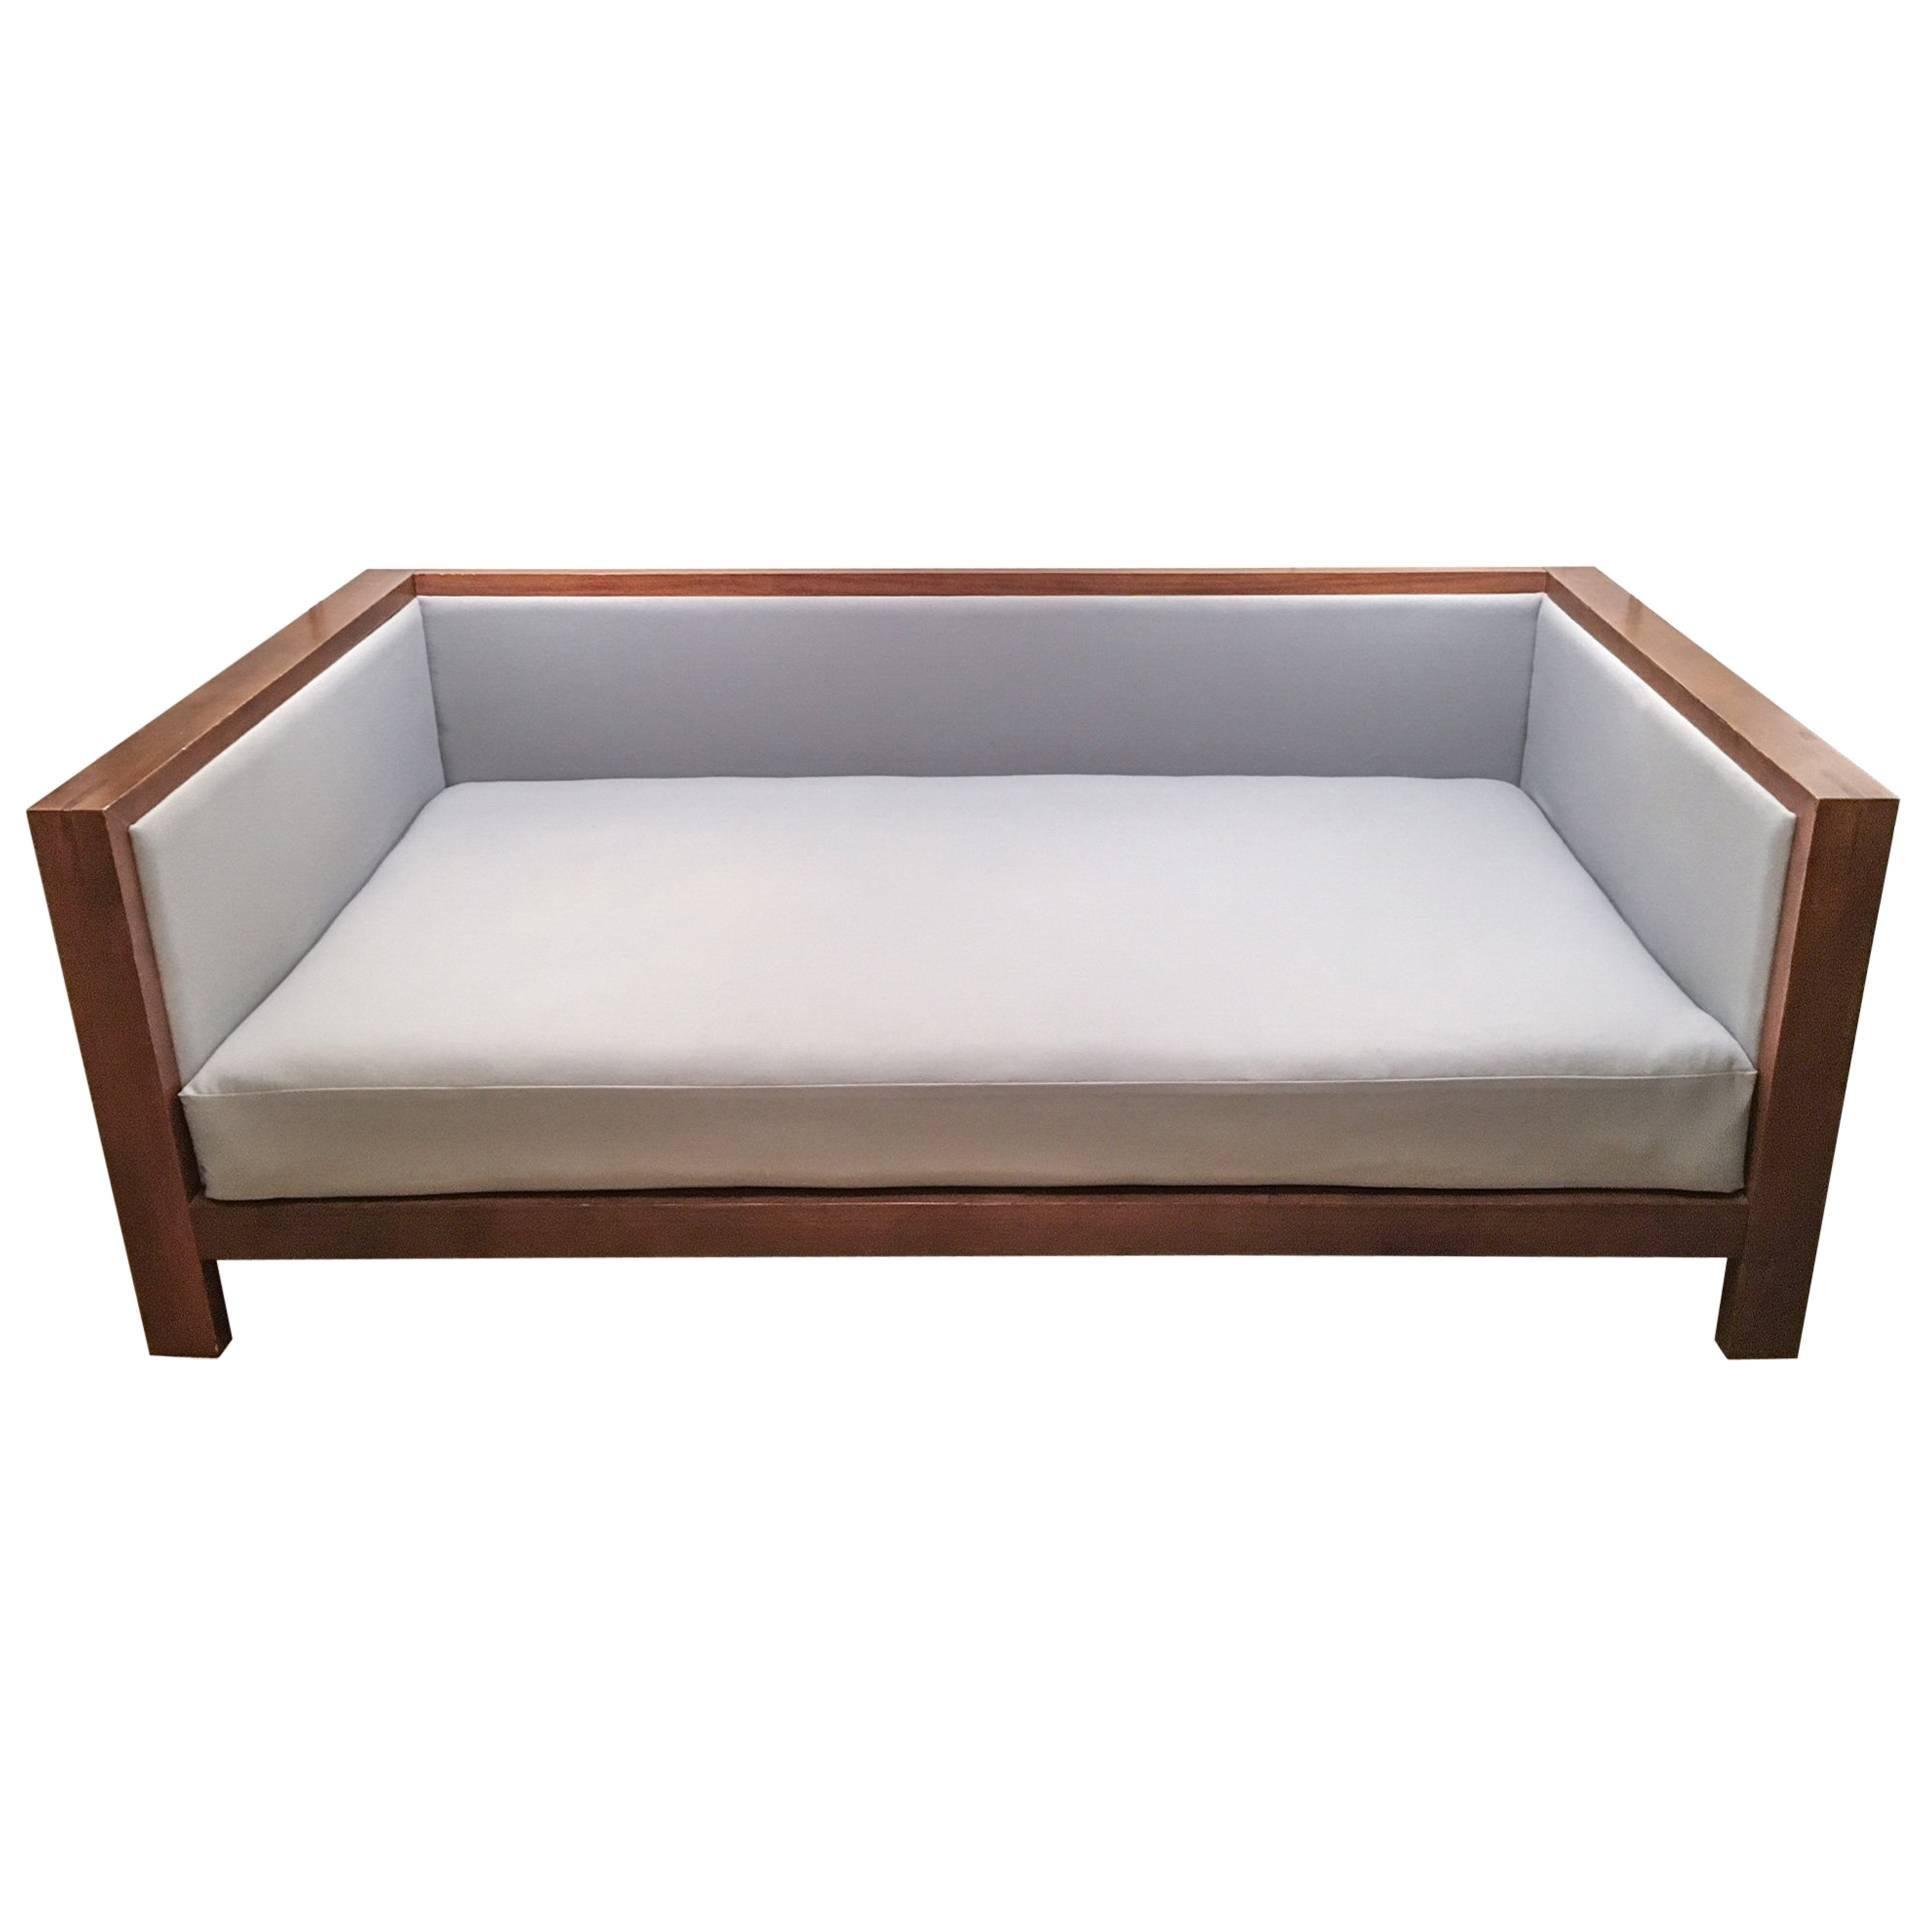 Mid-Century Modern Style Daybed with Hodsoll McKenzie Billiard Cloth Upholstery